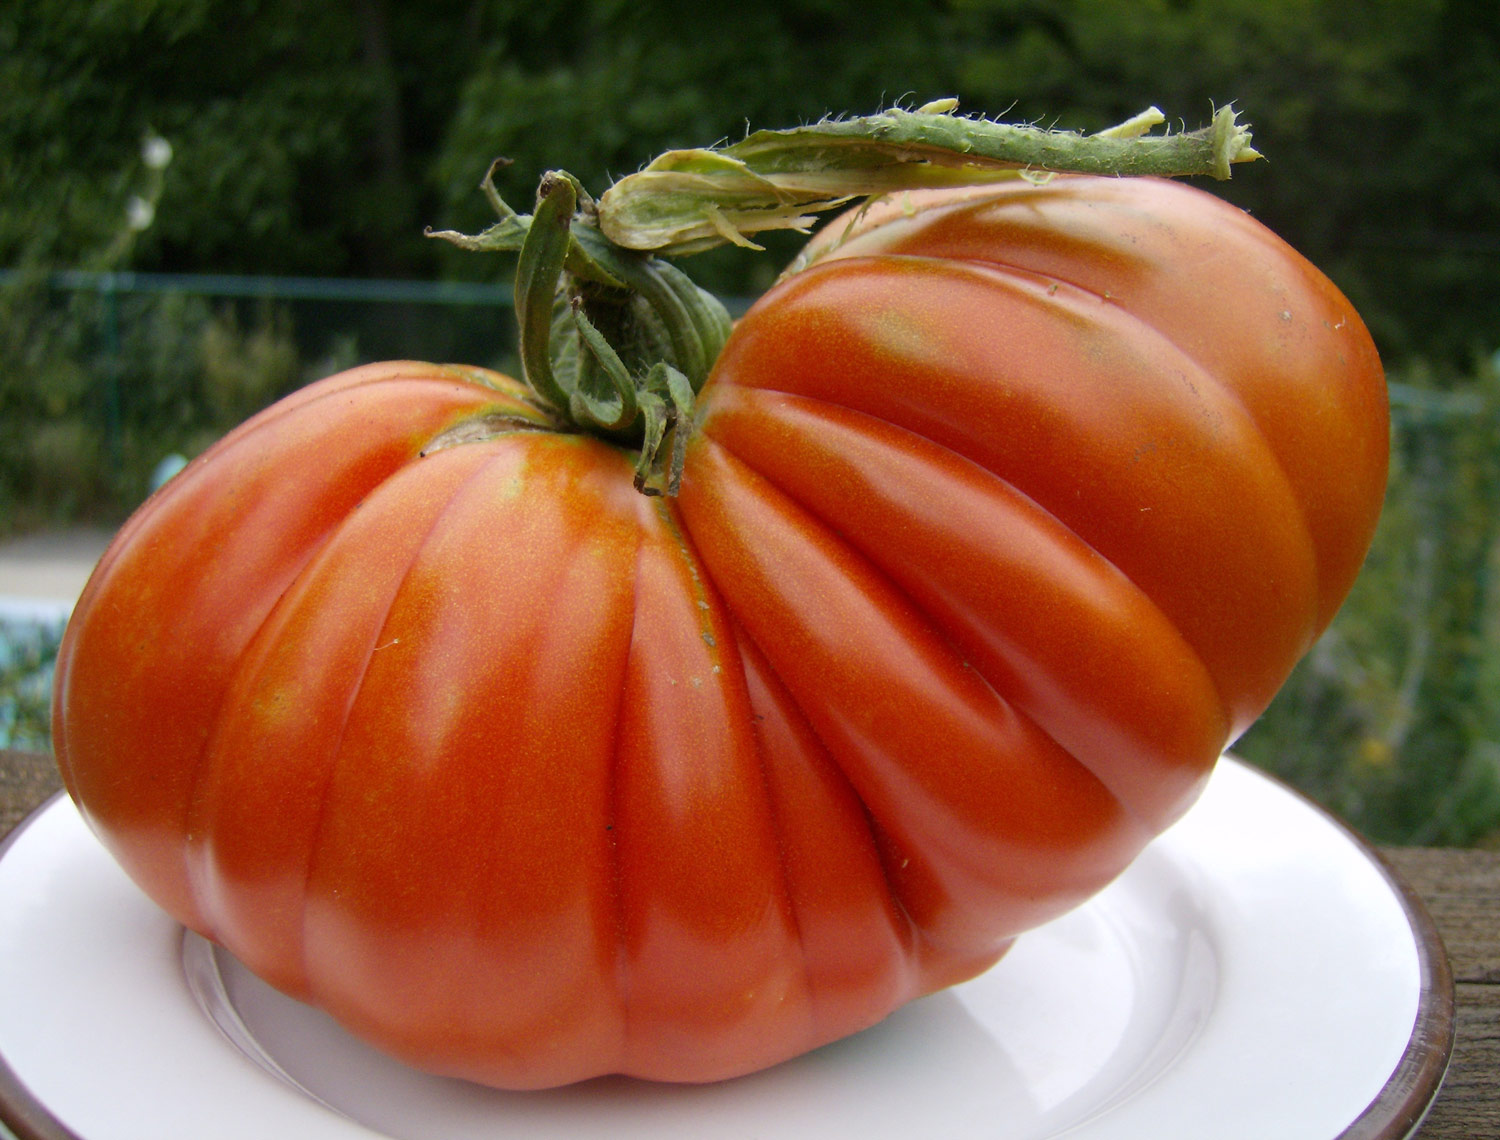 Want to grow a record-breaking tomato? Crush the competition with these six juicy tips.